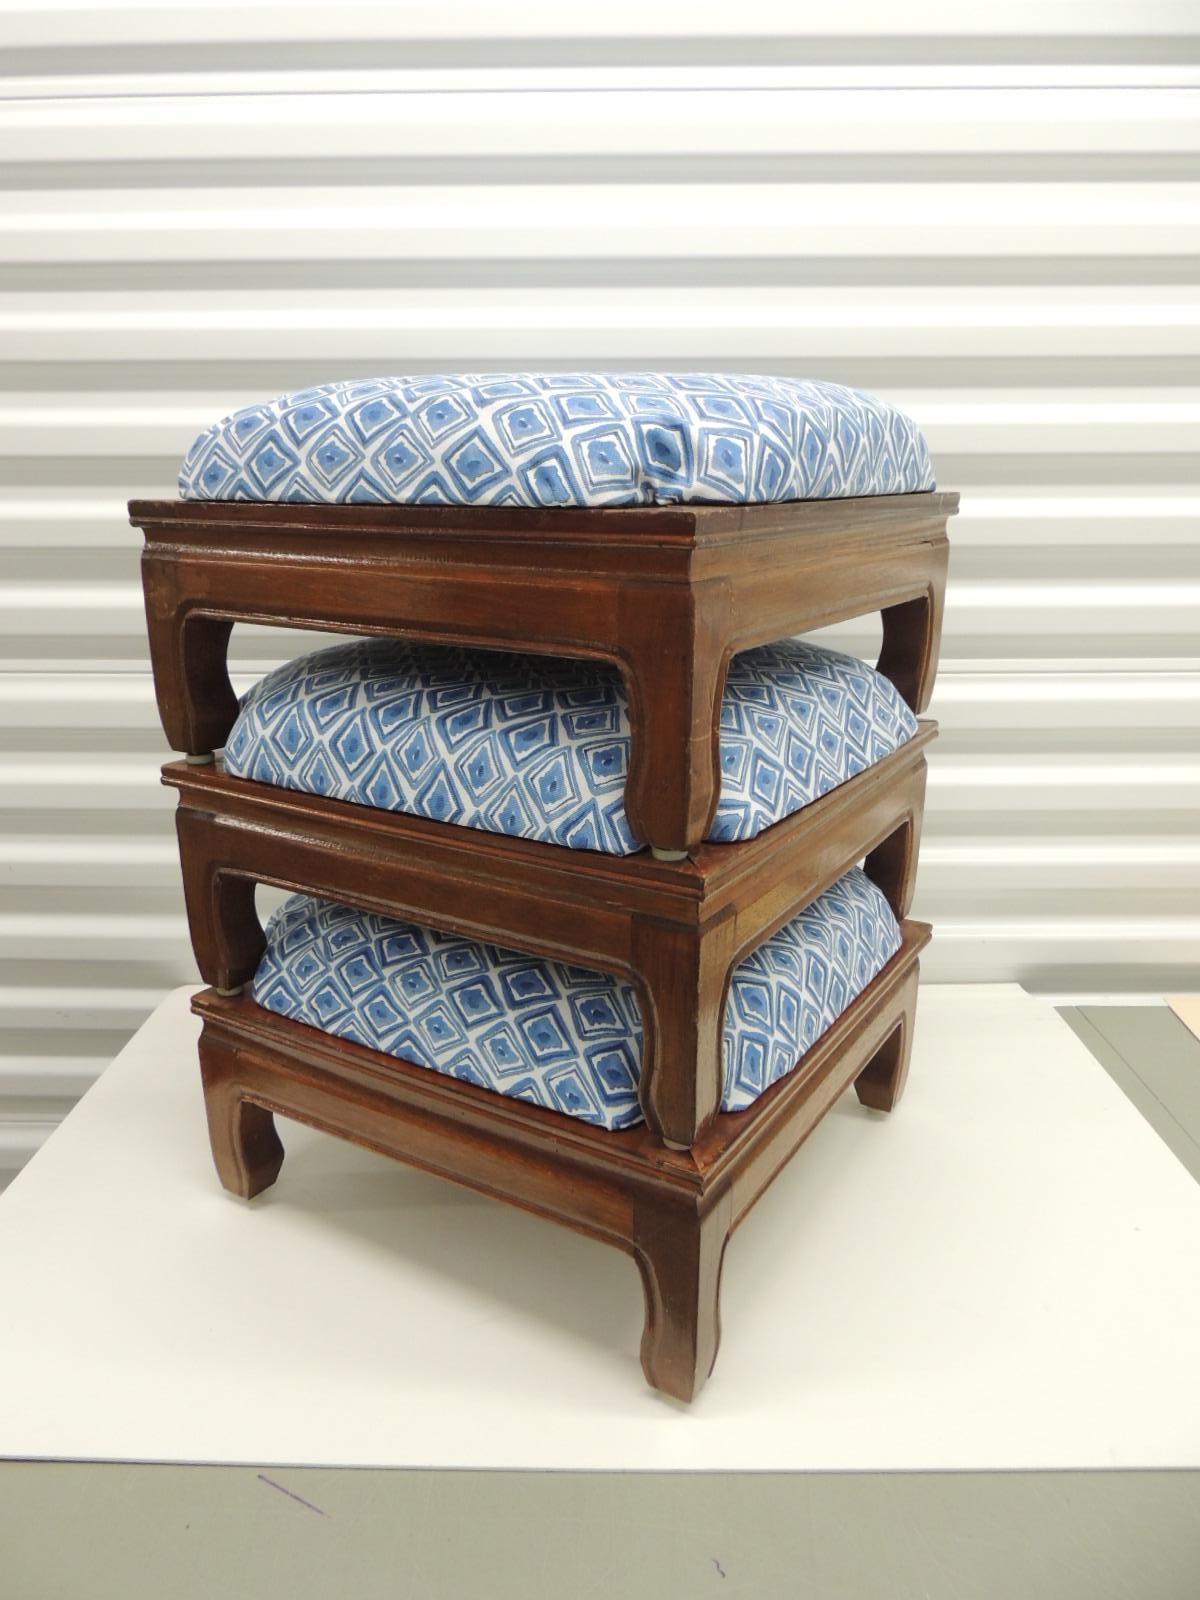 Vintage Set of (3) Square Nesting Ottoman/Stools Covered in Blue & White Fabric.
Size as pictured: 23